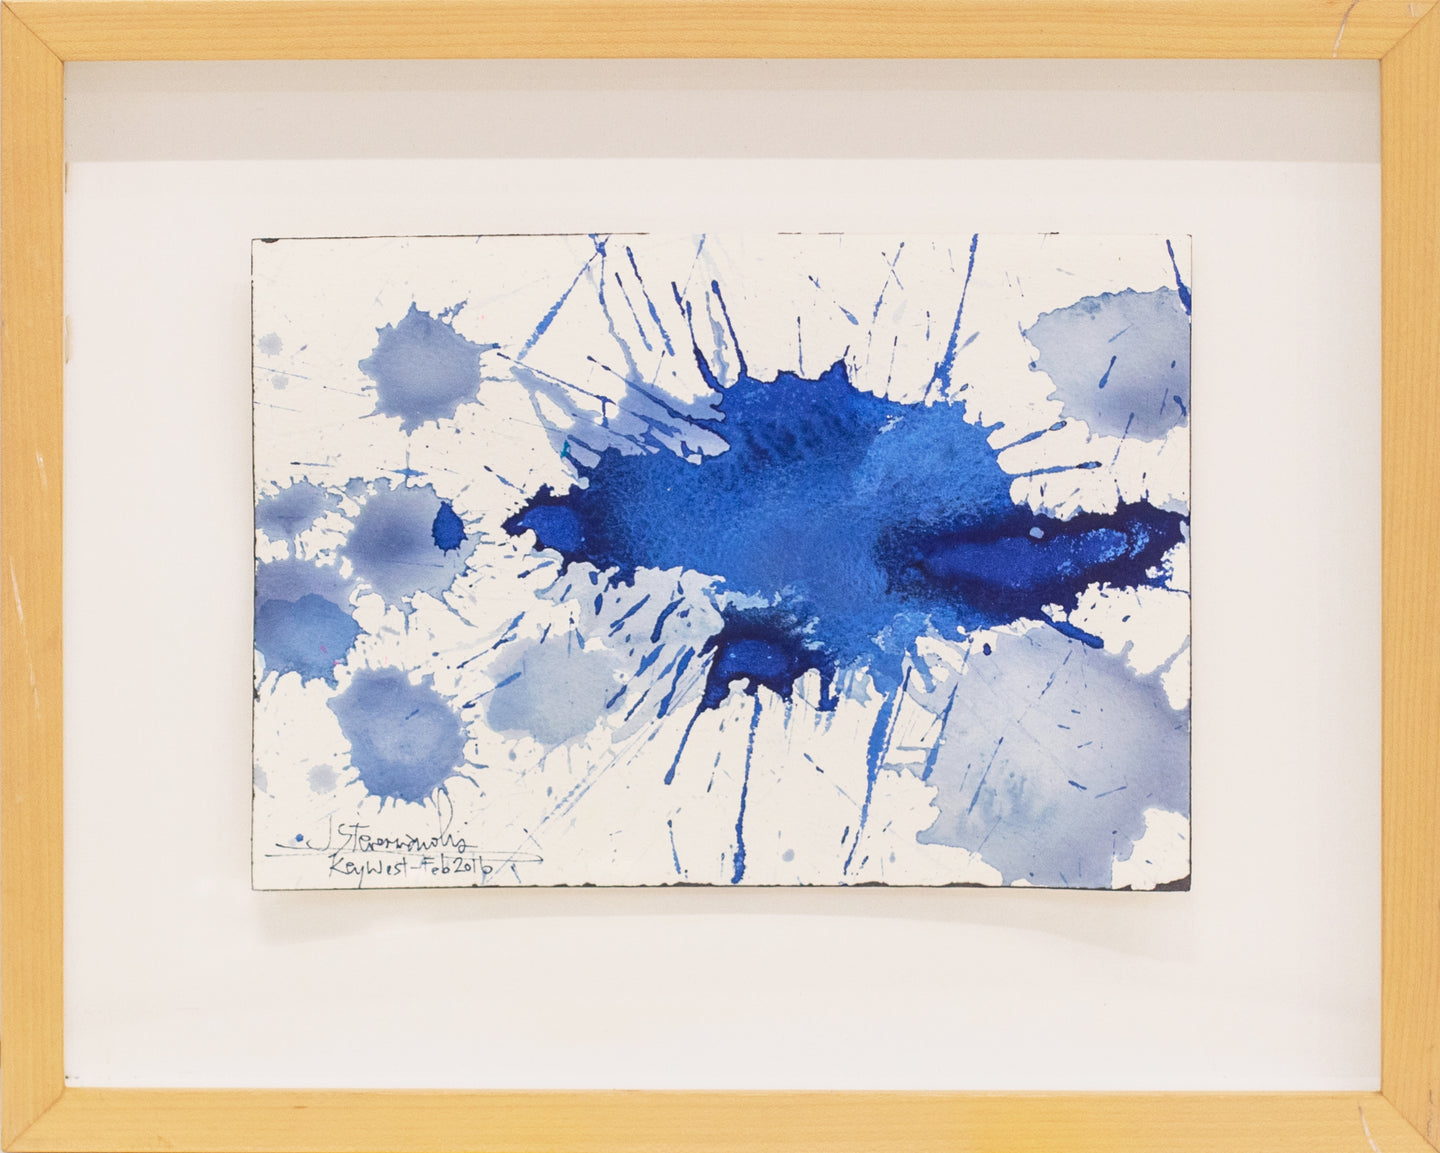 J. Steven Manolis, Splash (Key West) 07.10.07, 2016, Watercolor painting Arches paper, 7 x 10 inches, Blue Abstract Art, Splash Art for sale at Manolis Projects Art Gallery, Miami, Fl